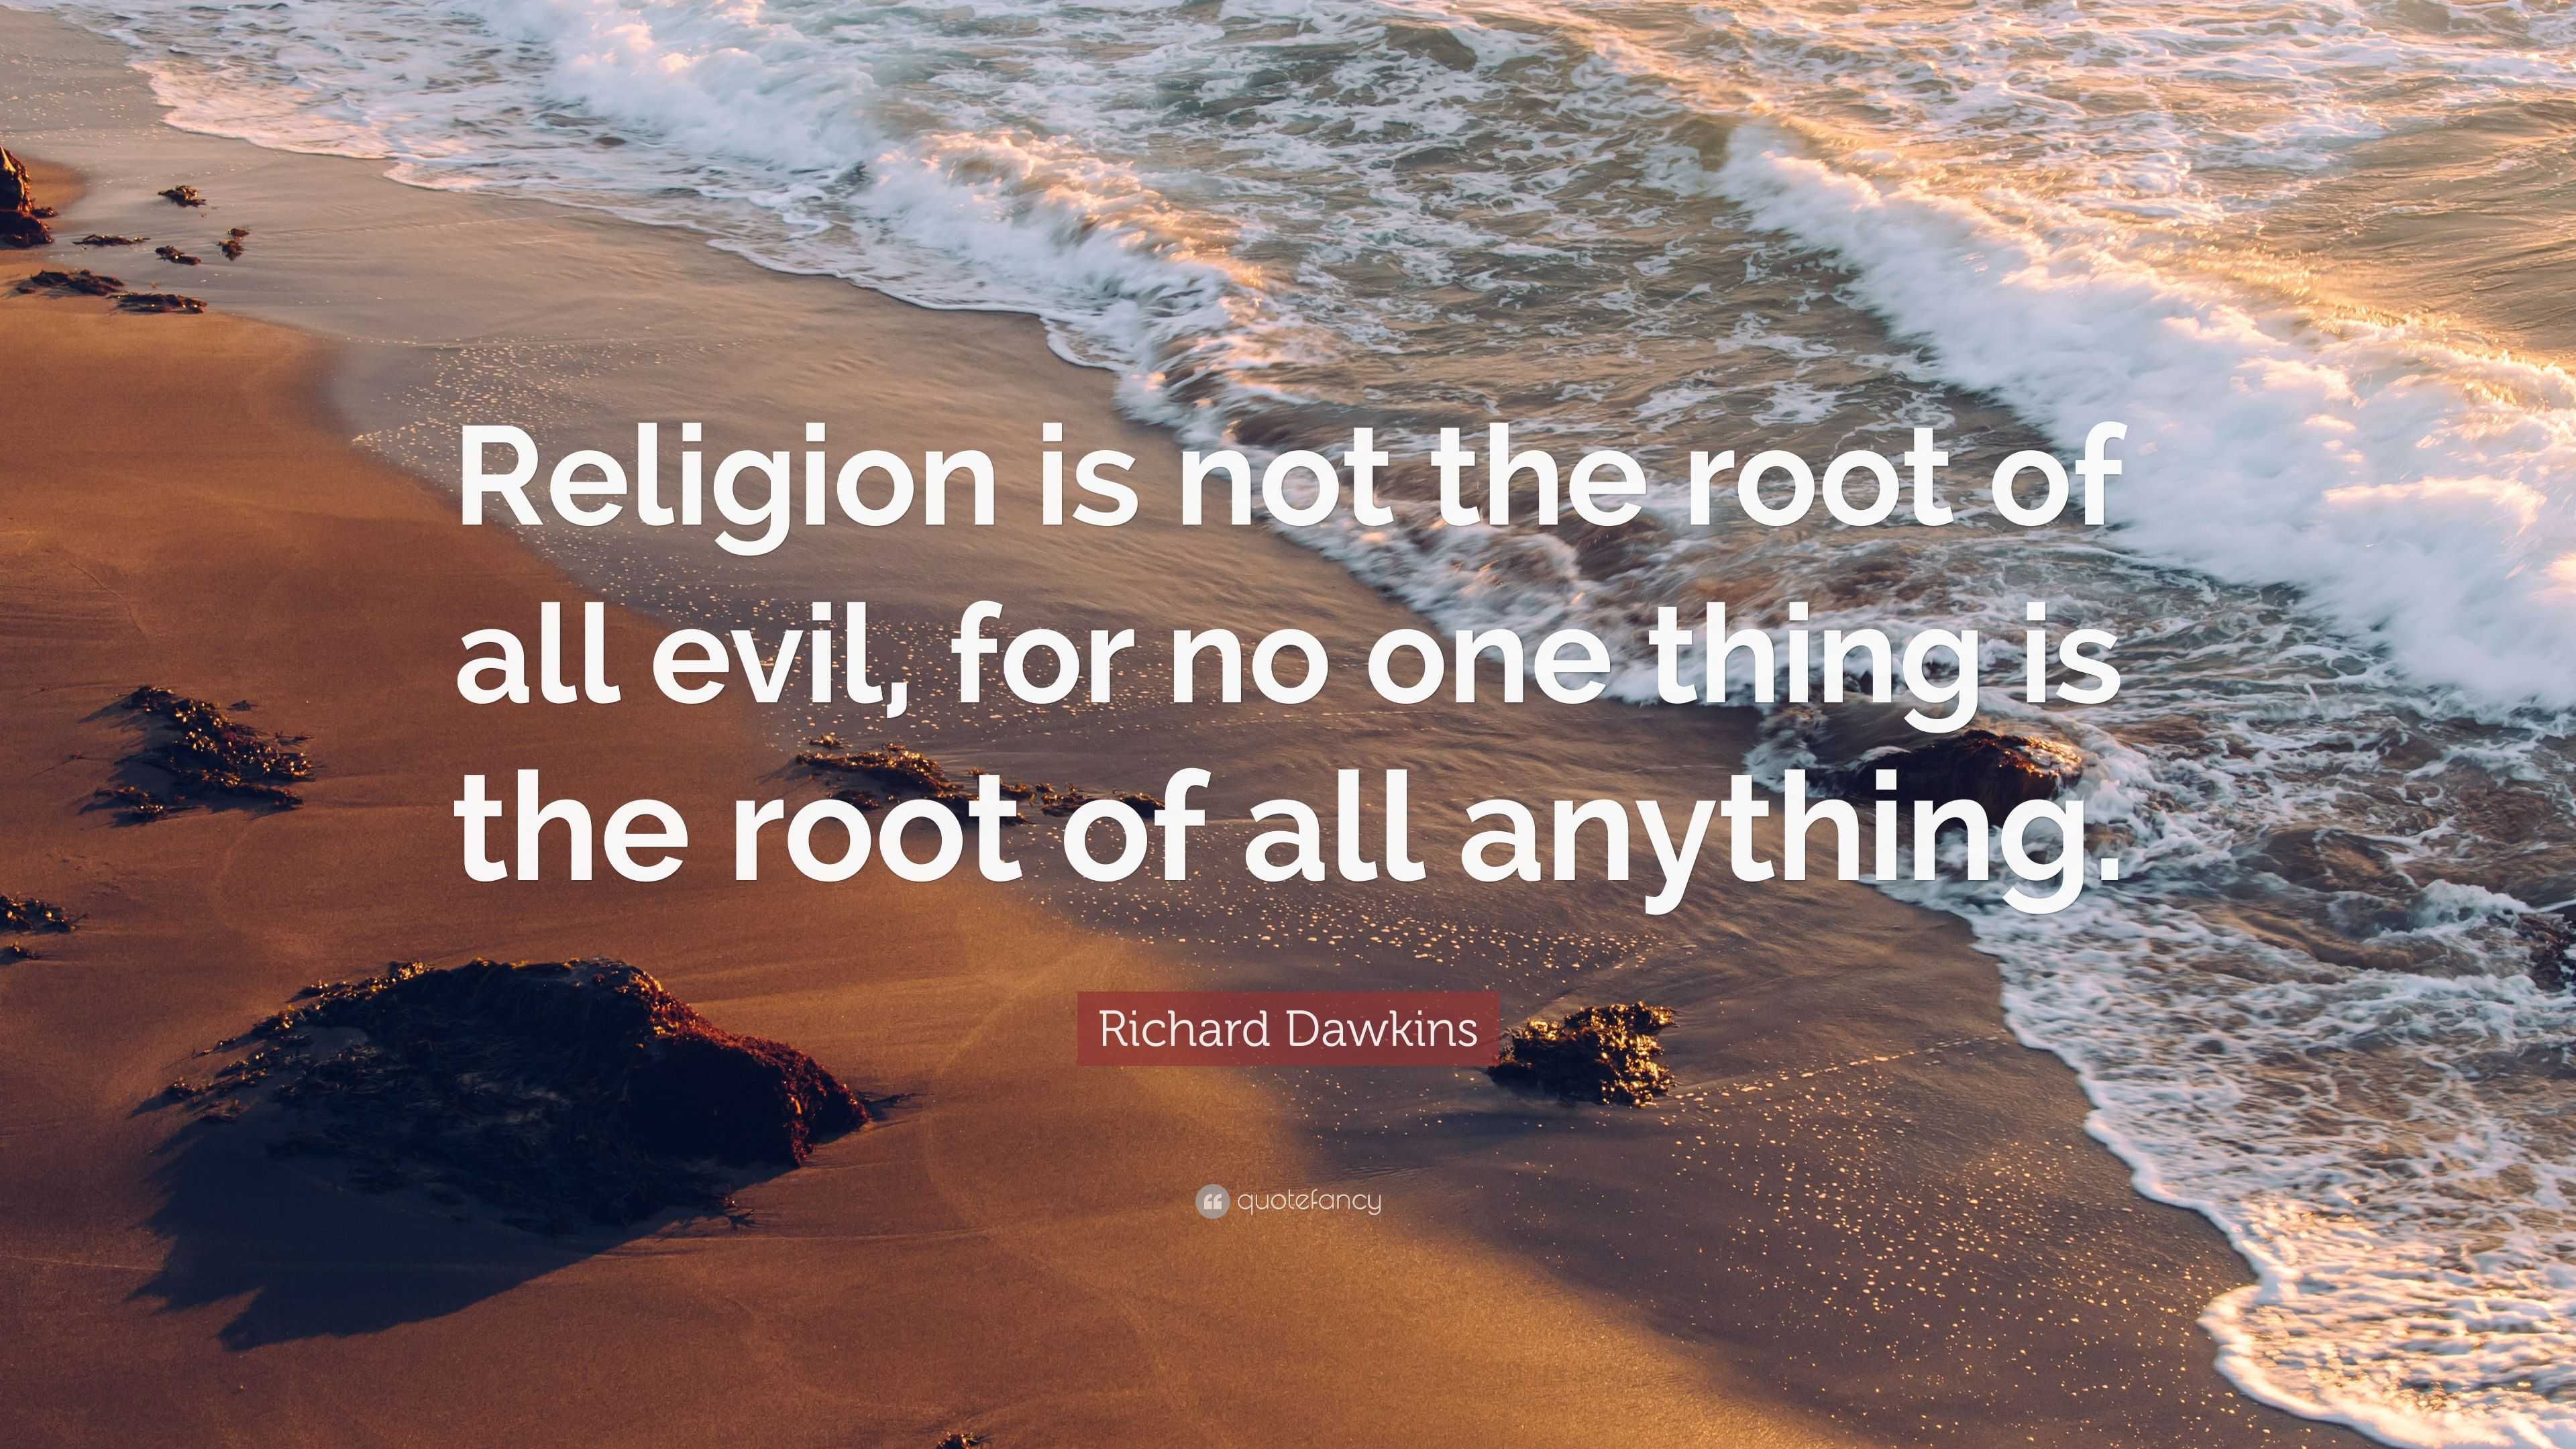 Richard Dawkins Quote: “Religion is not the root of all evil, for no ...